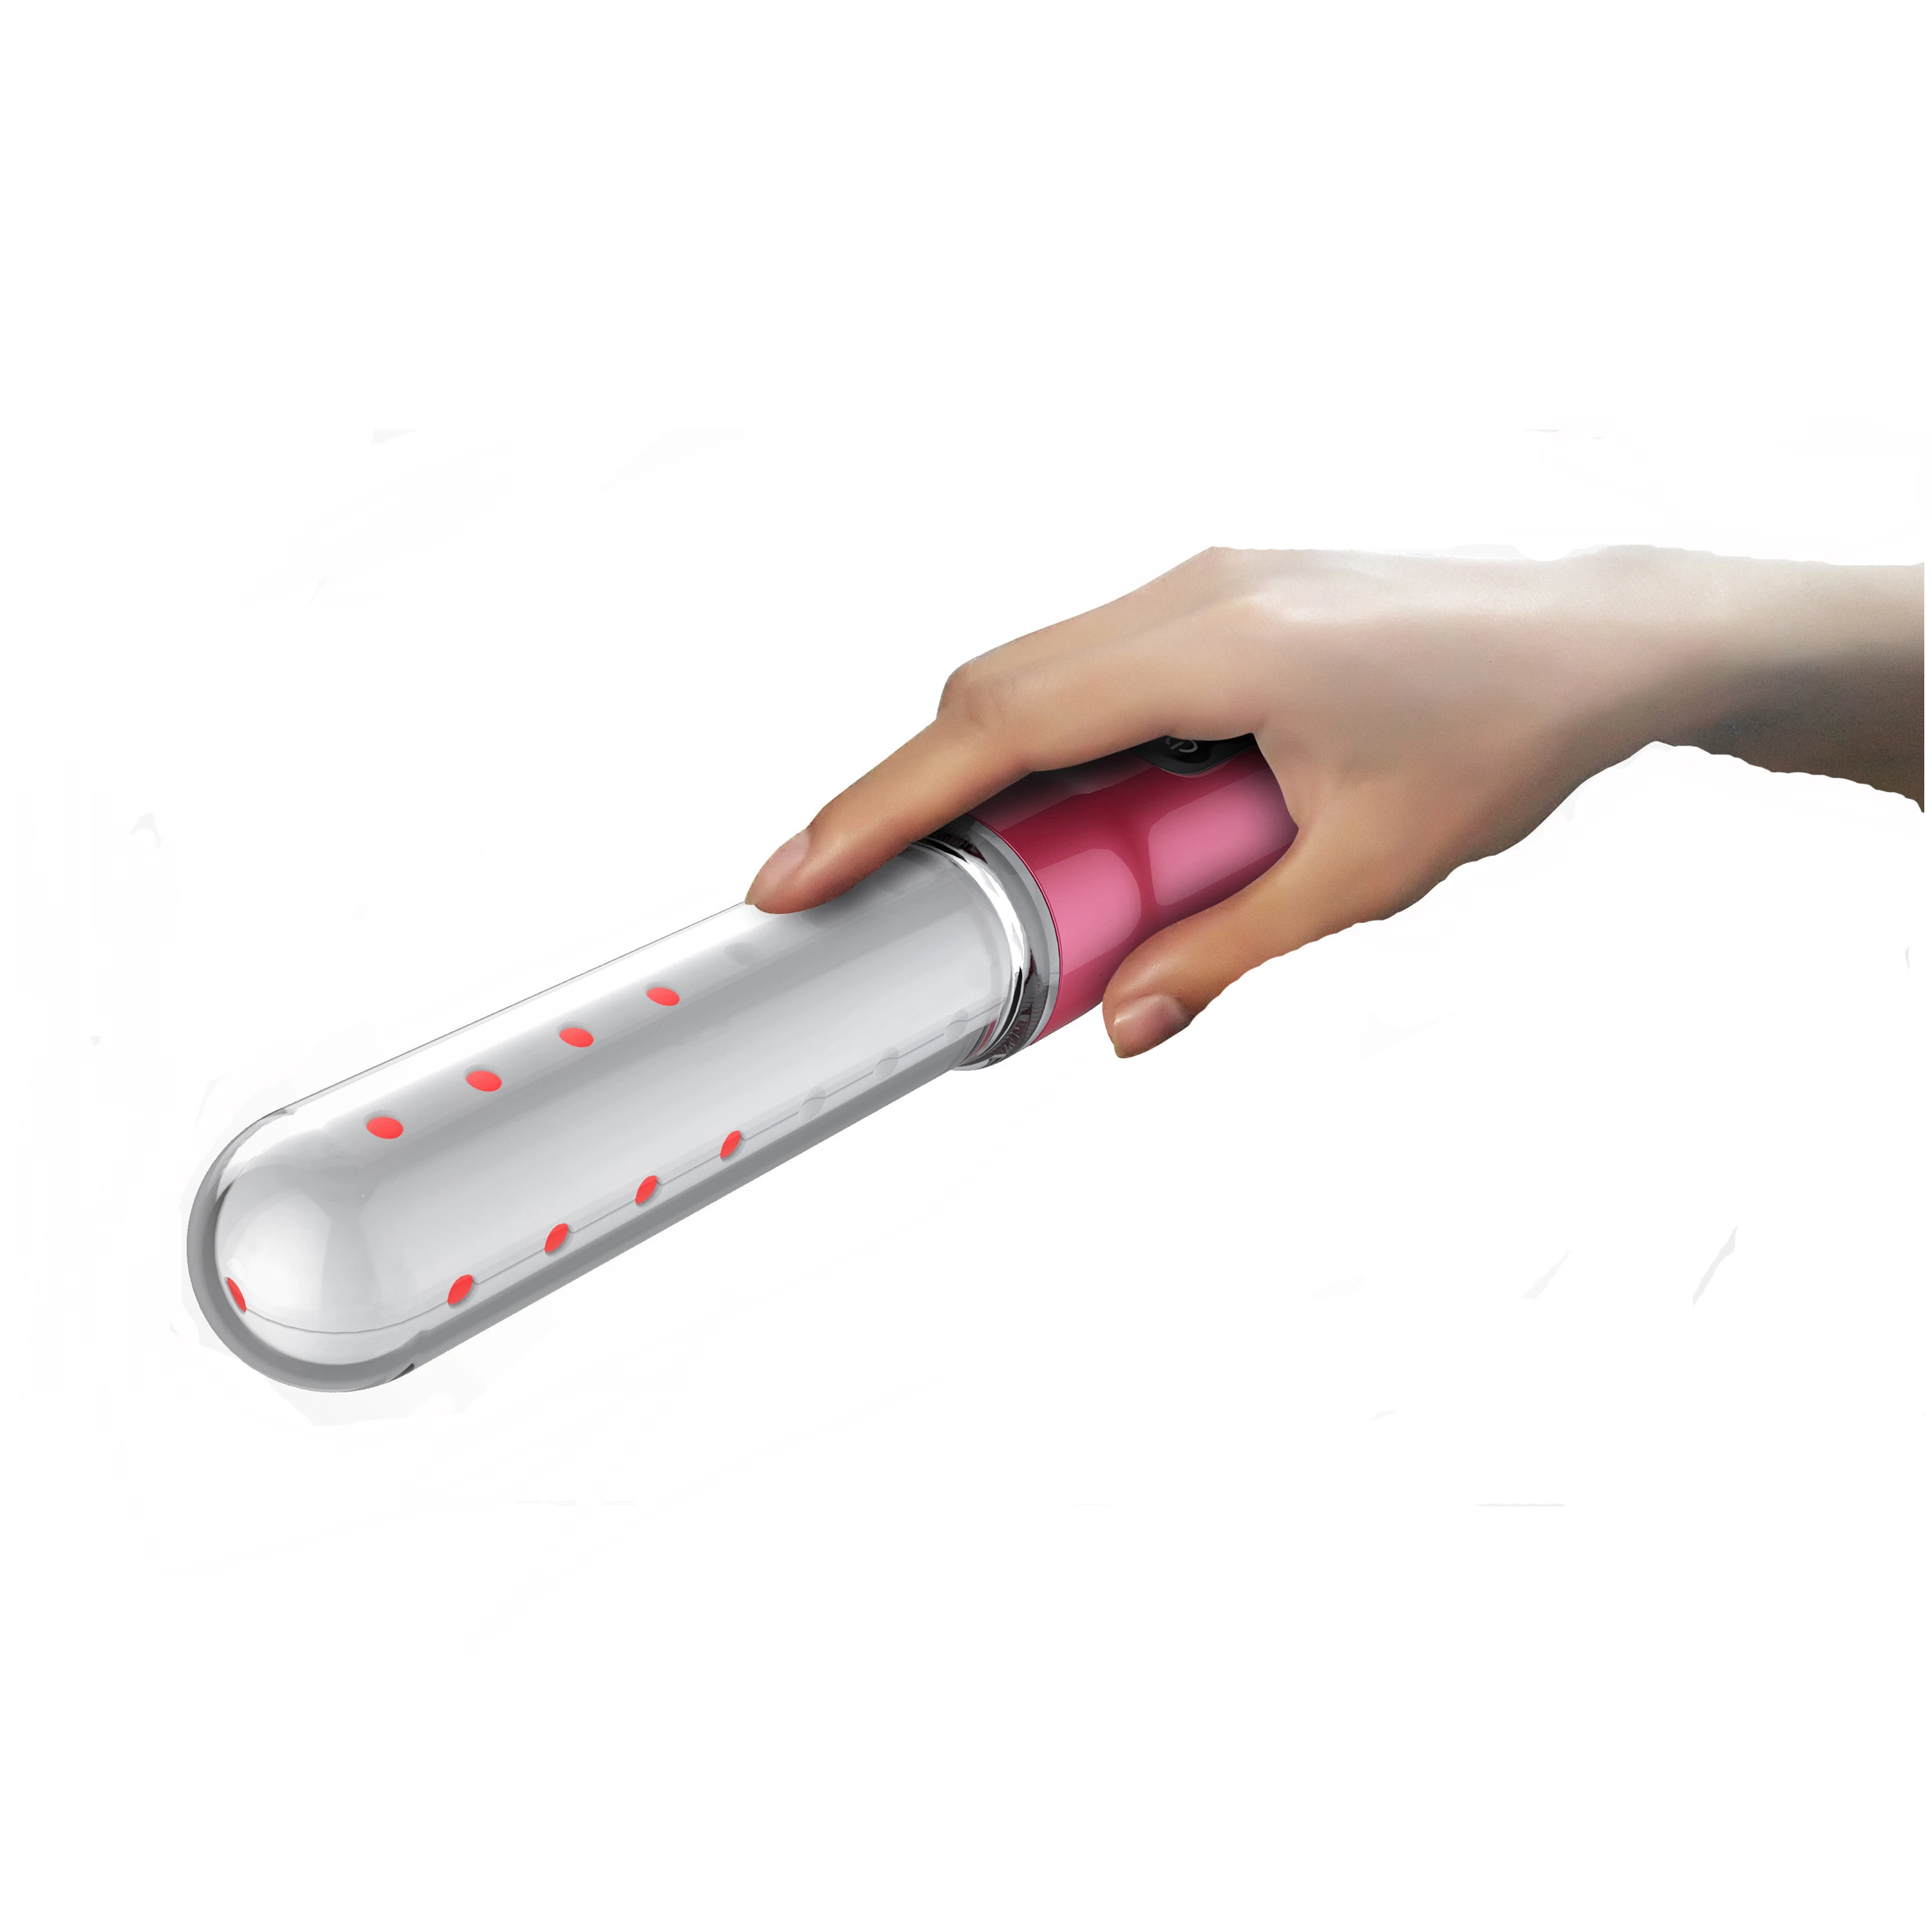 Home Use Vaginal Electrode for Tightening Vagina Muscle Vaginitis Treatment Physical Therapy Equipment